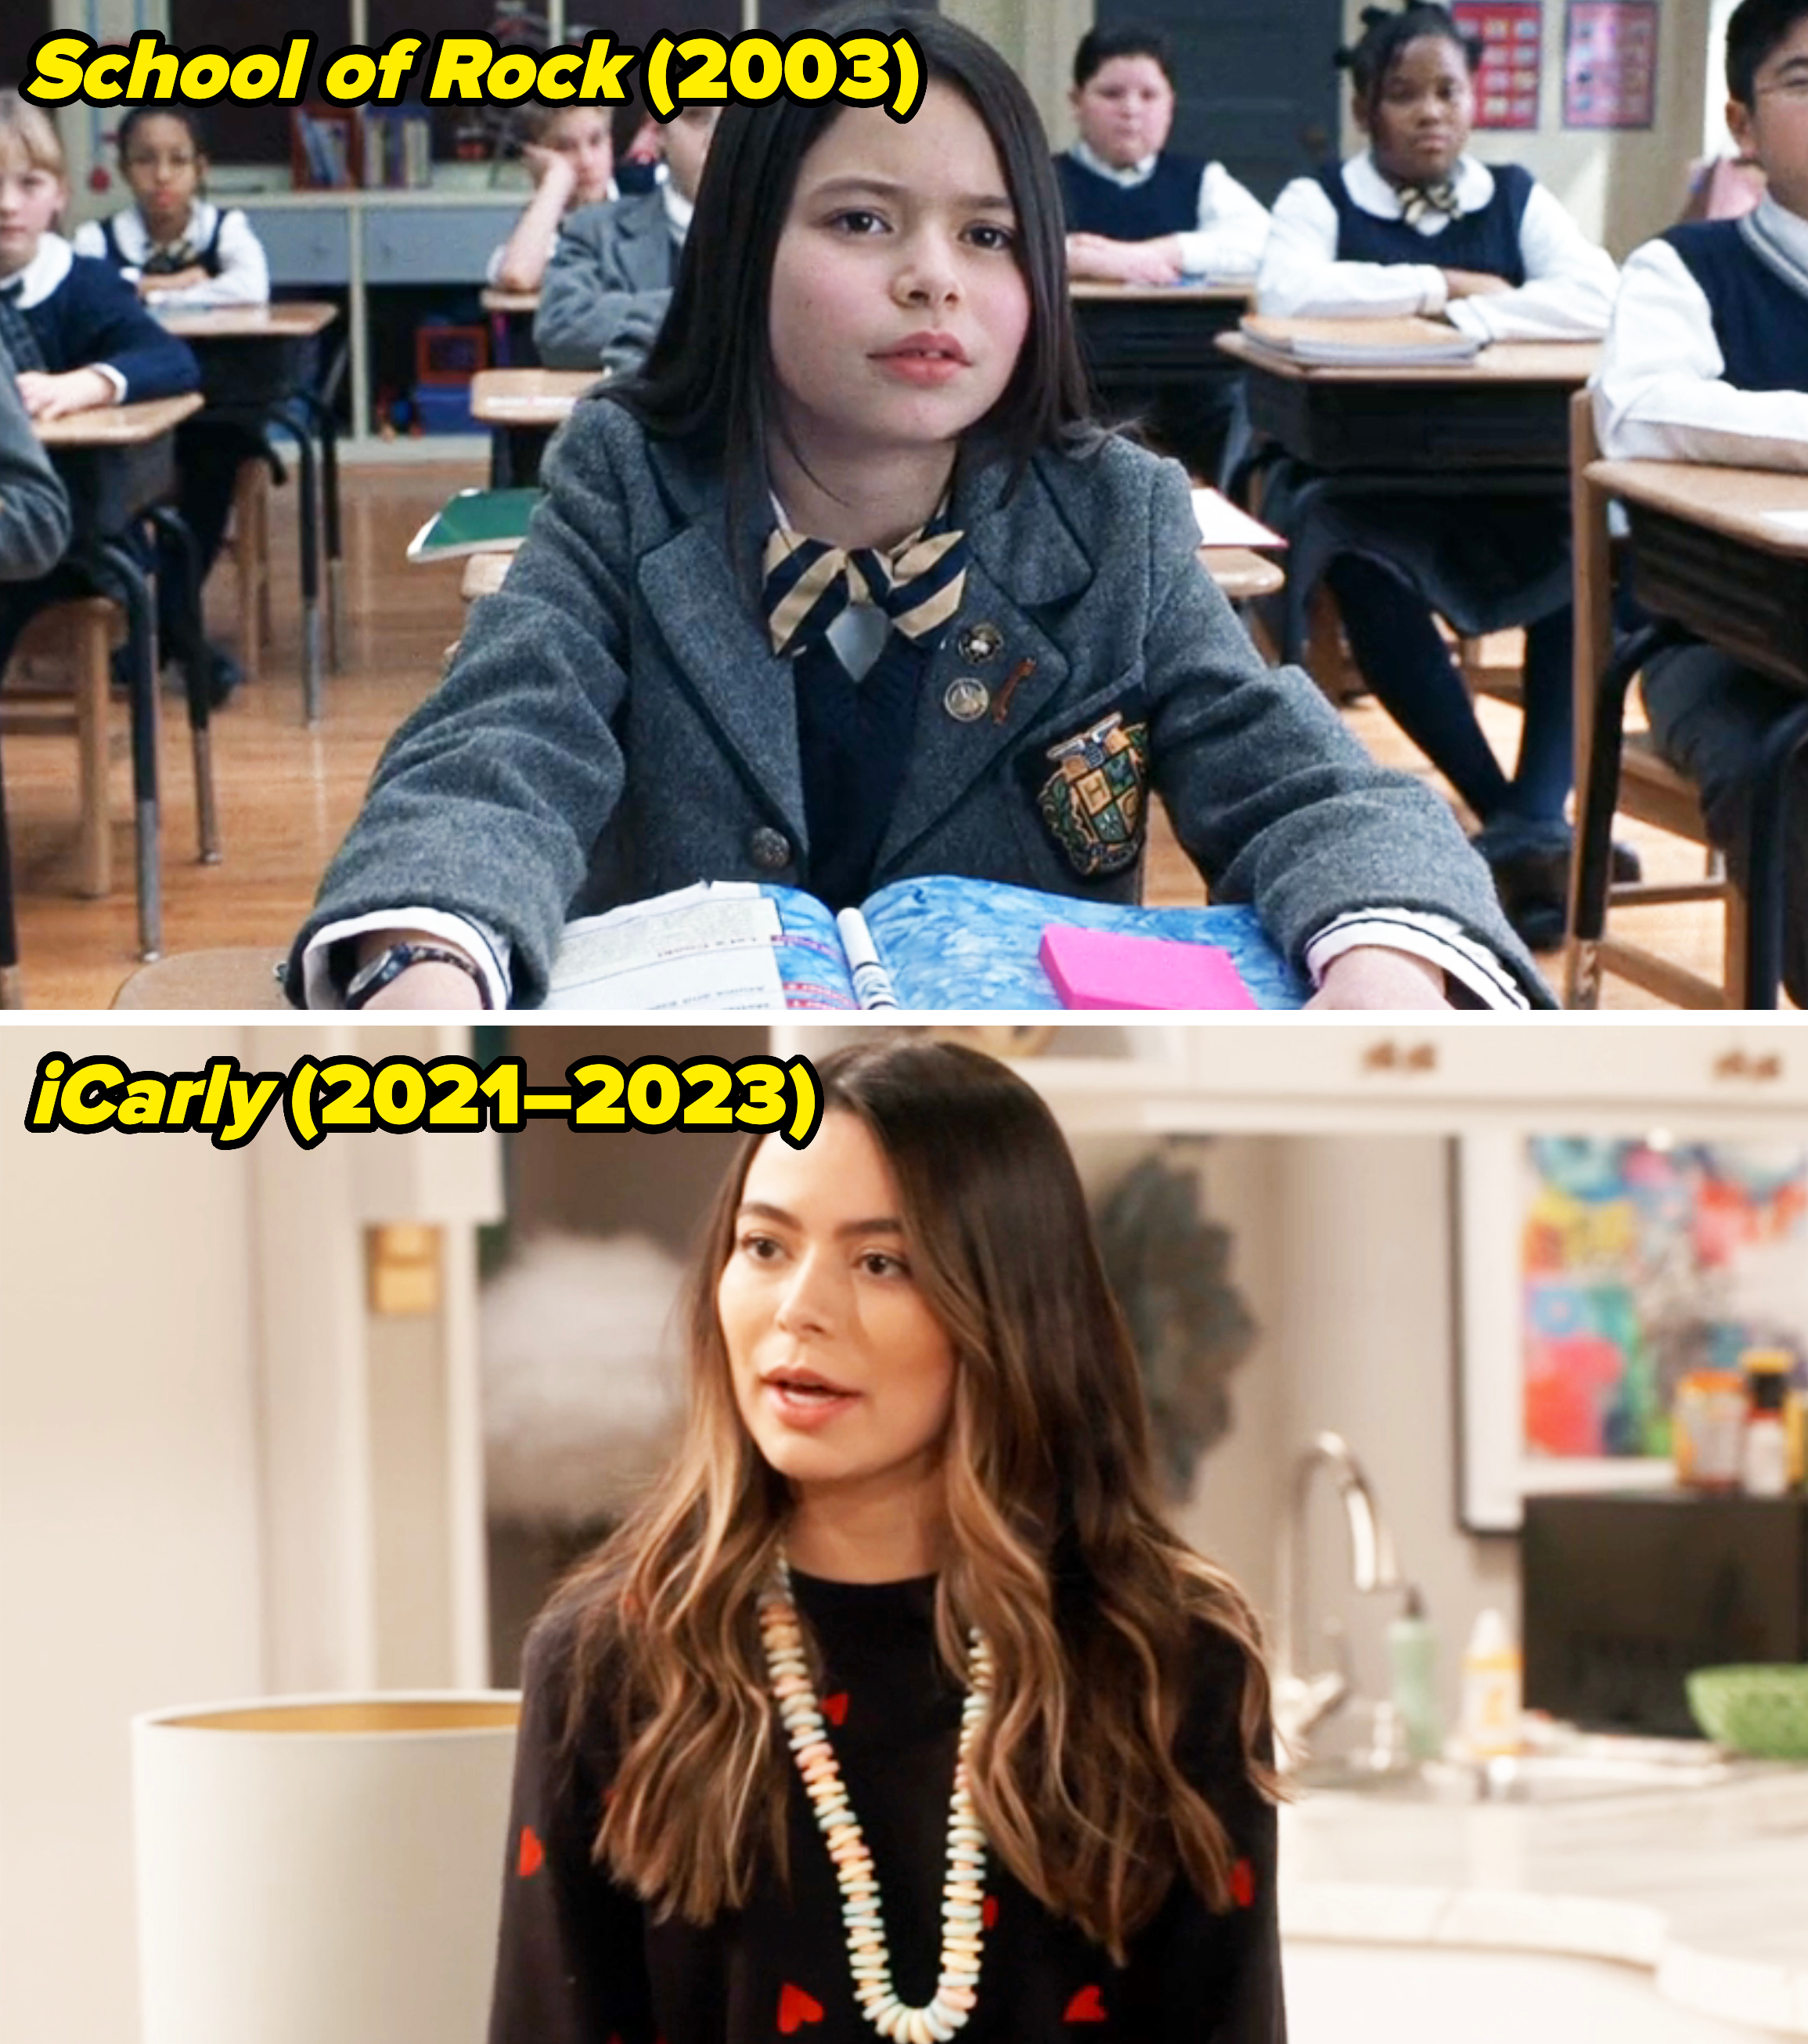 her as a student in school of rock and then recently in her icarly reboot